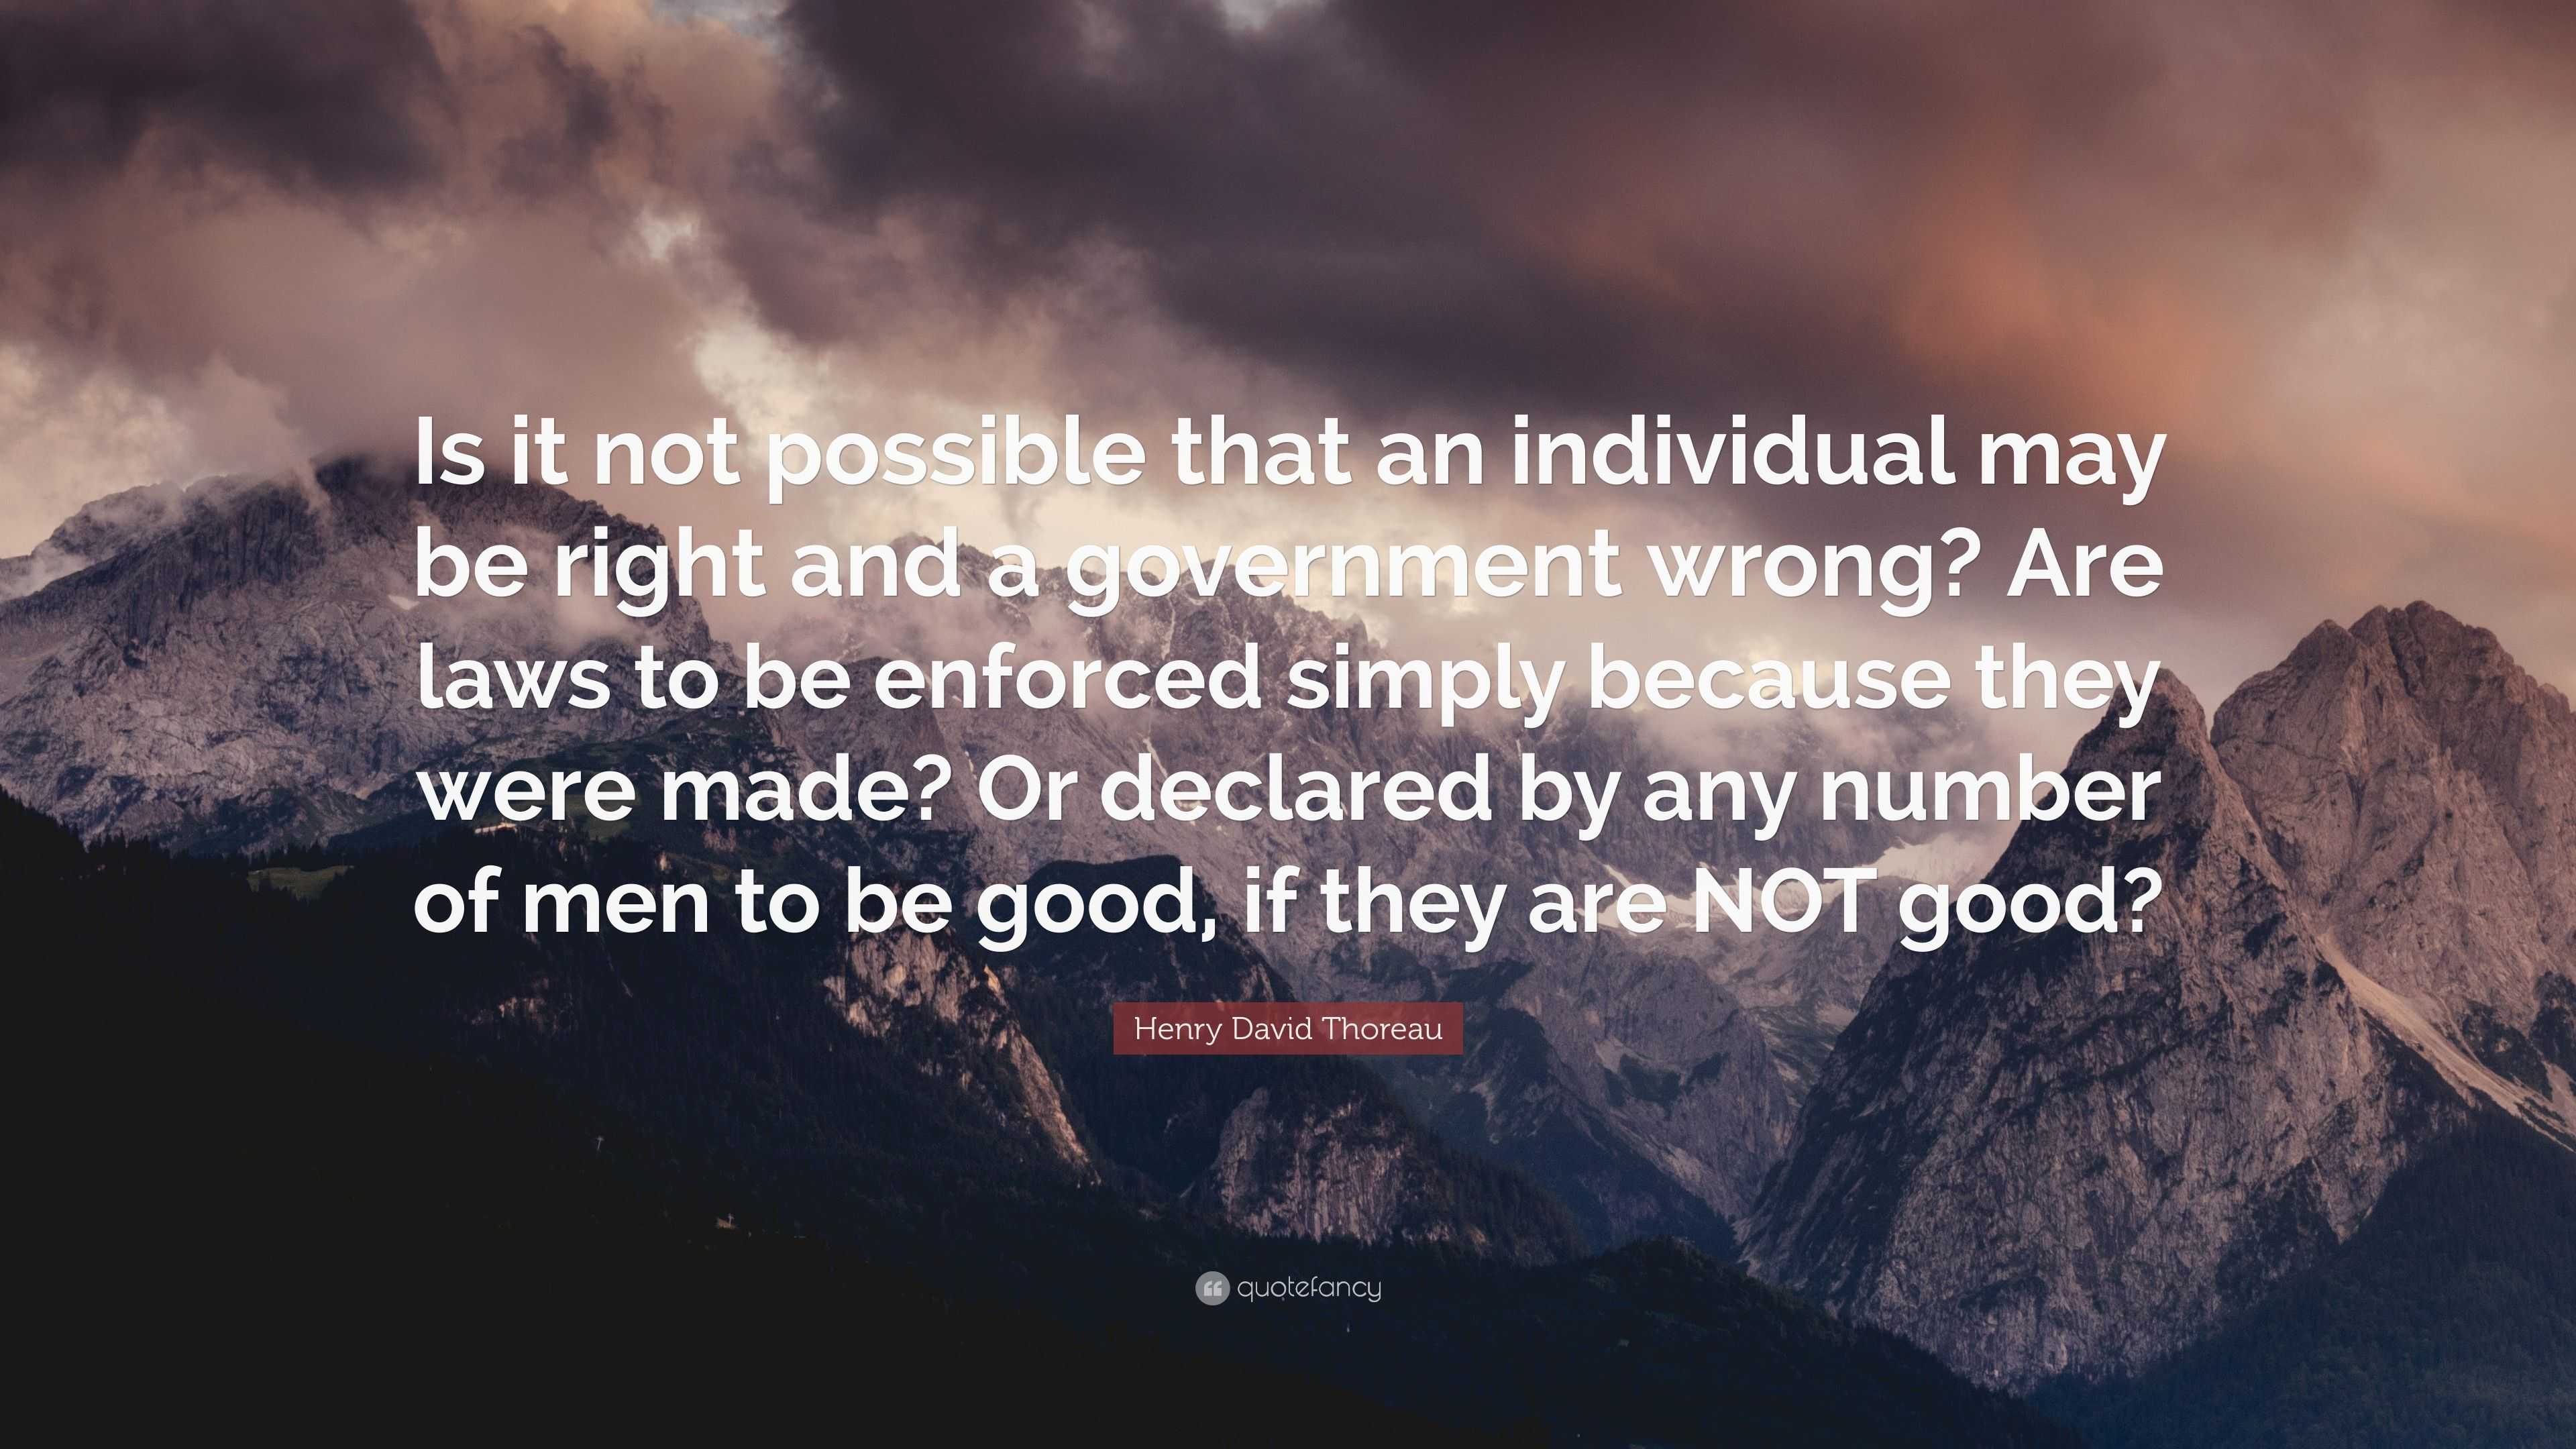 Henry David Thoreau Quote: “Is it not possible that an individual may be  right and a government wrong? Are laws to be enforced simply because they  w...” (7 wallpapers) - Quotefancy